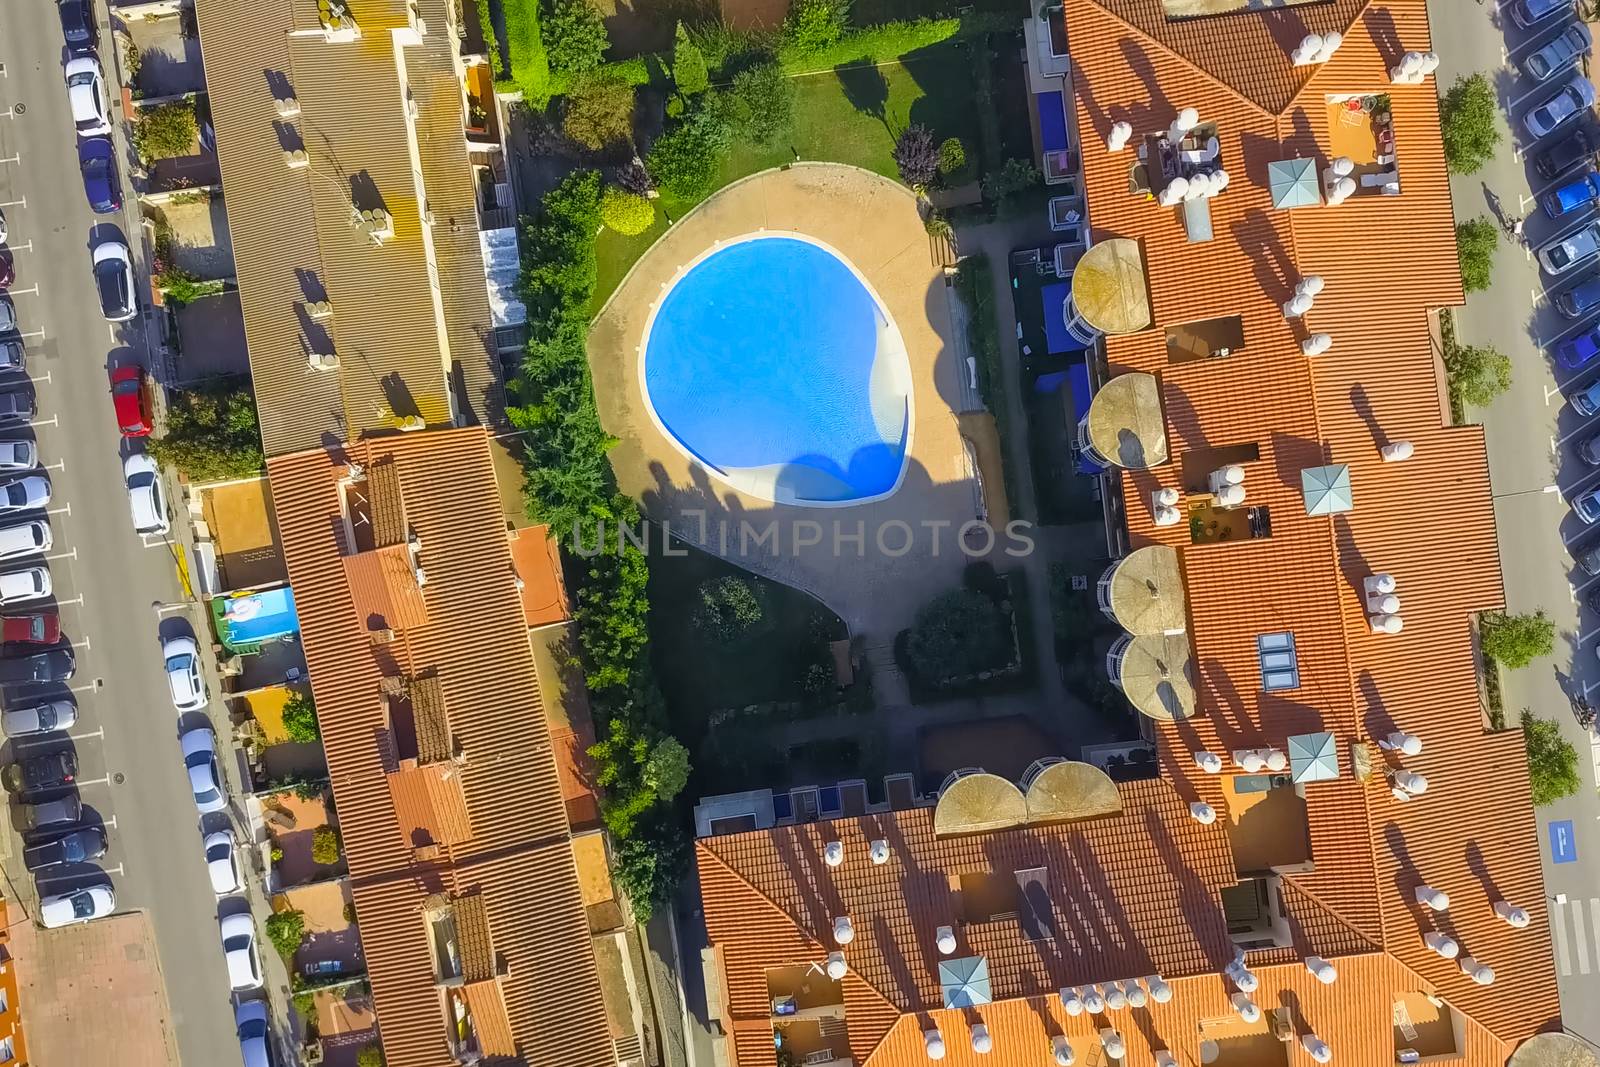 Accommodation in Spain, country resorts and recreation, view from above on the houses.